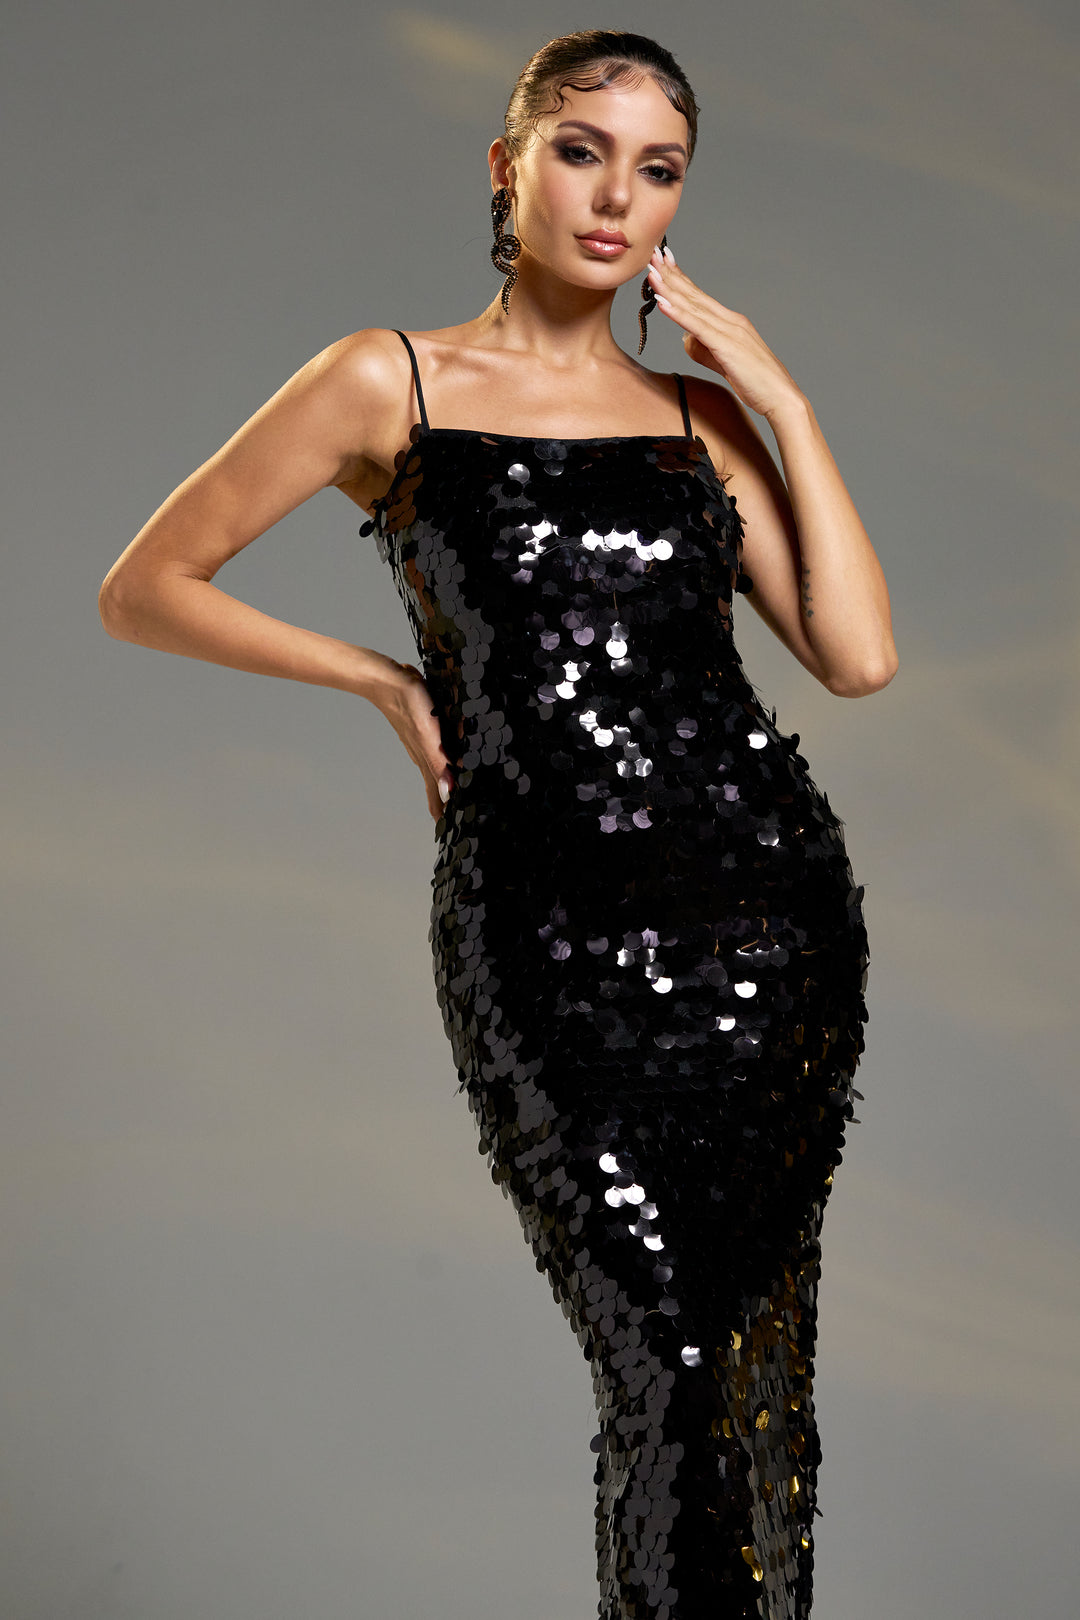 Sesidy Frederica Strappy Black Sequin Dress in Black